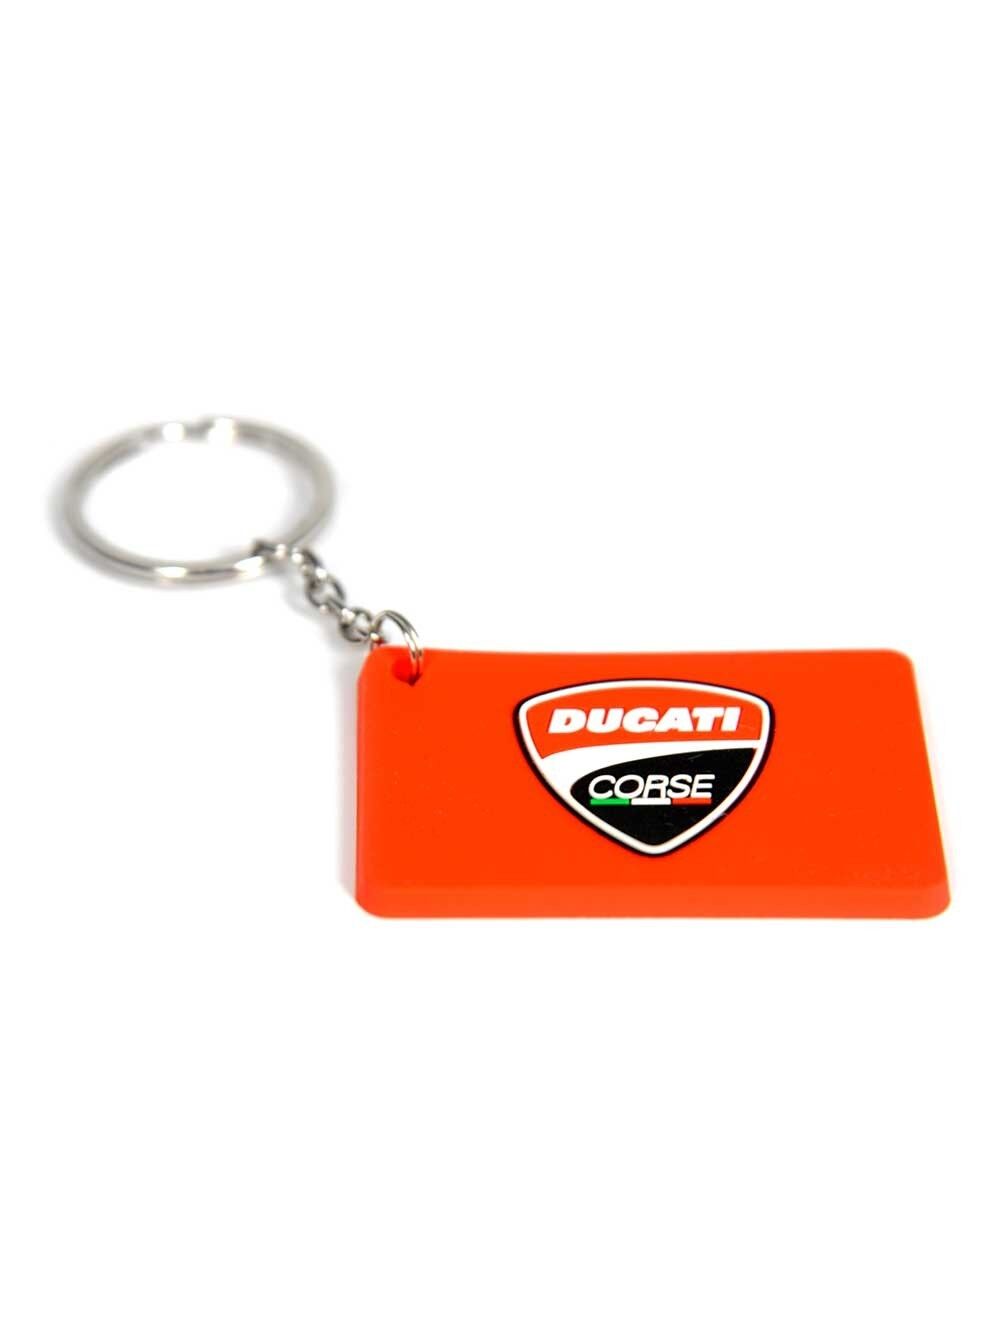 New Official Ducati Corse Keyring - 15 56002